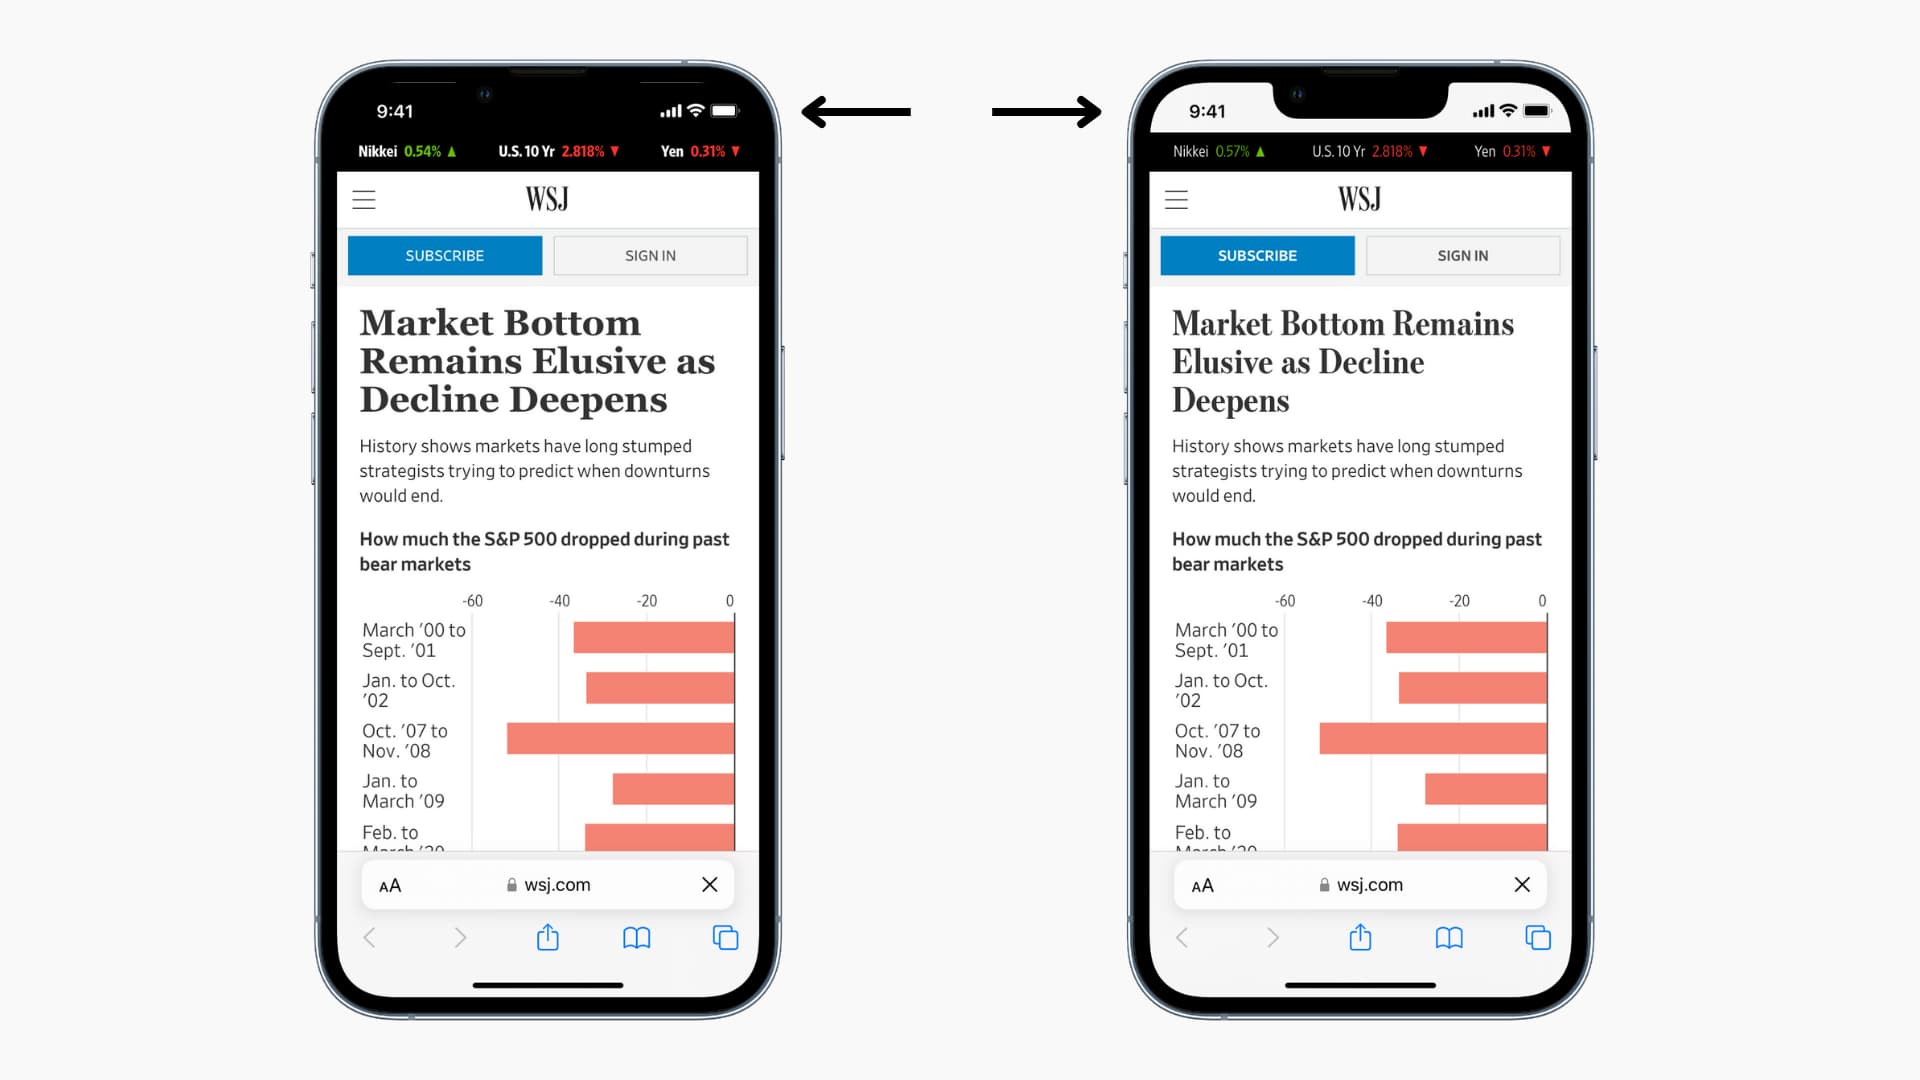 Website tinting on and off in iPhone Safari